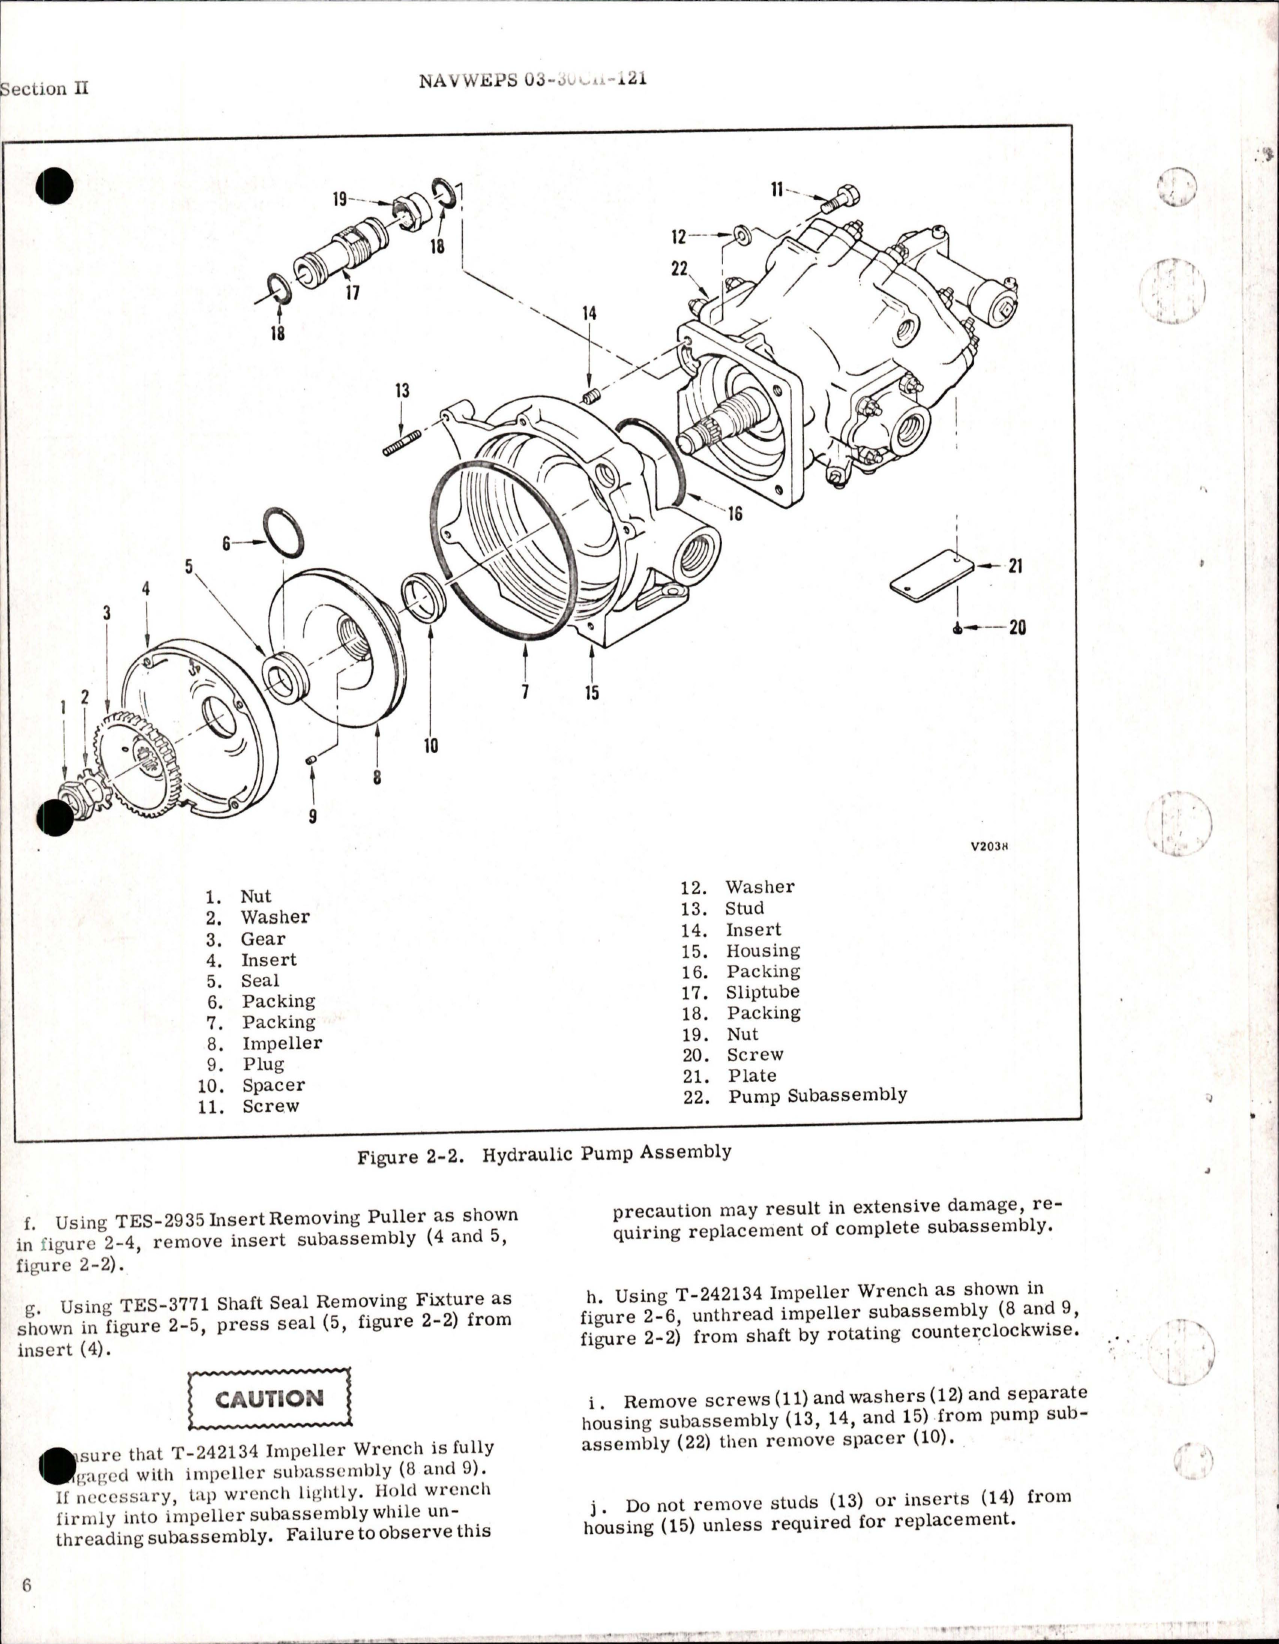 Sample page 9 from AirCorps Library document: Maintenance Instructions for Electrically Driven Hydraulic Motorpump - Models EA-1320-077, EA-1320-077C, MPEVI-060-1